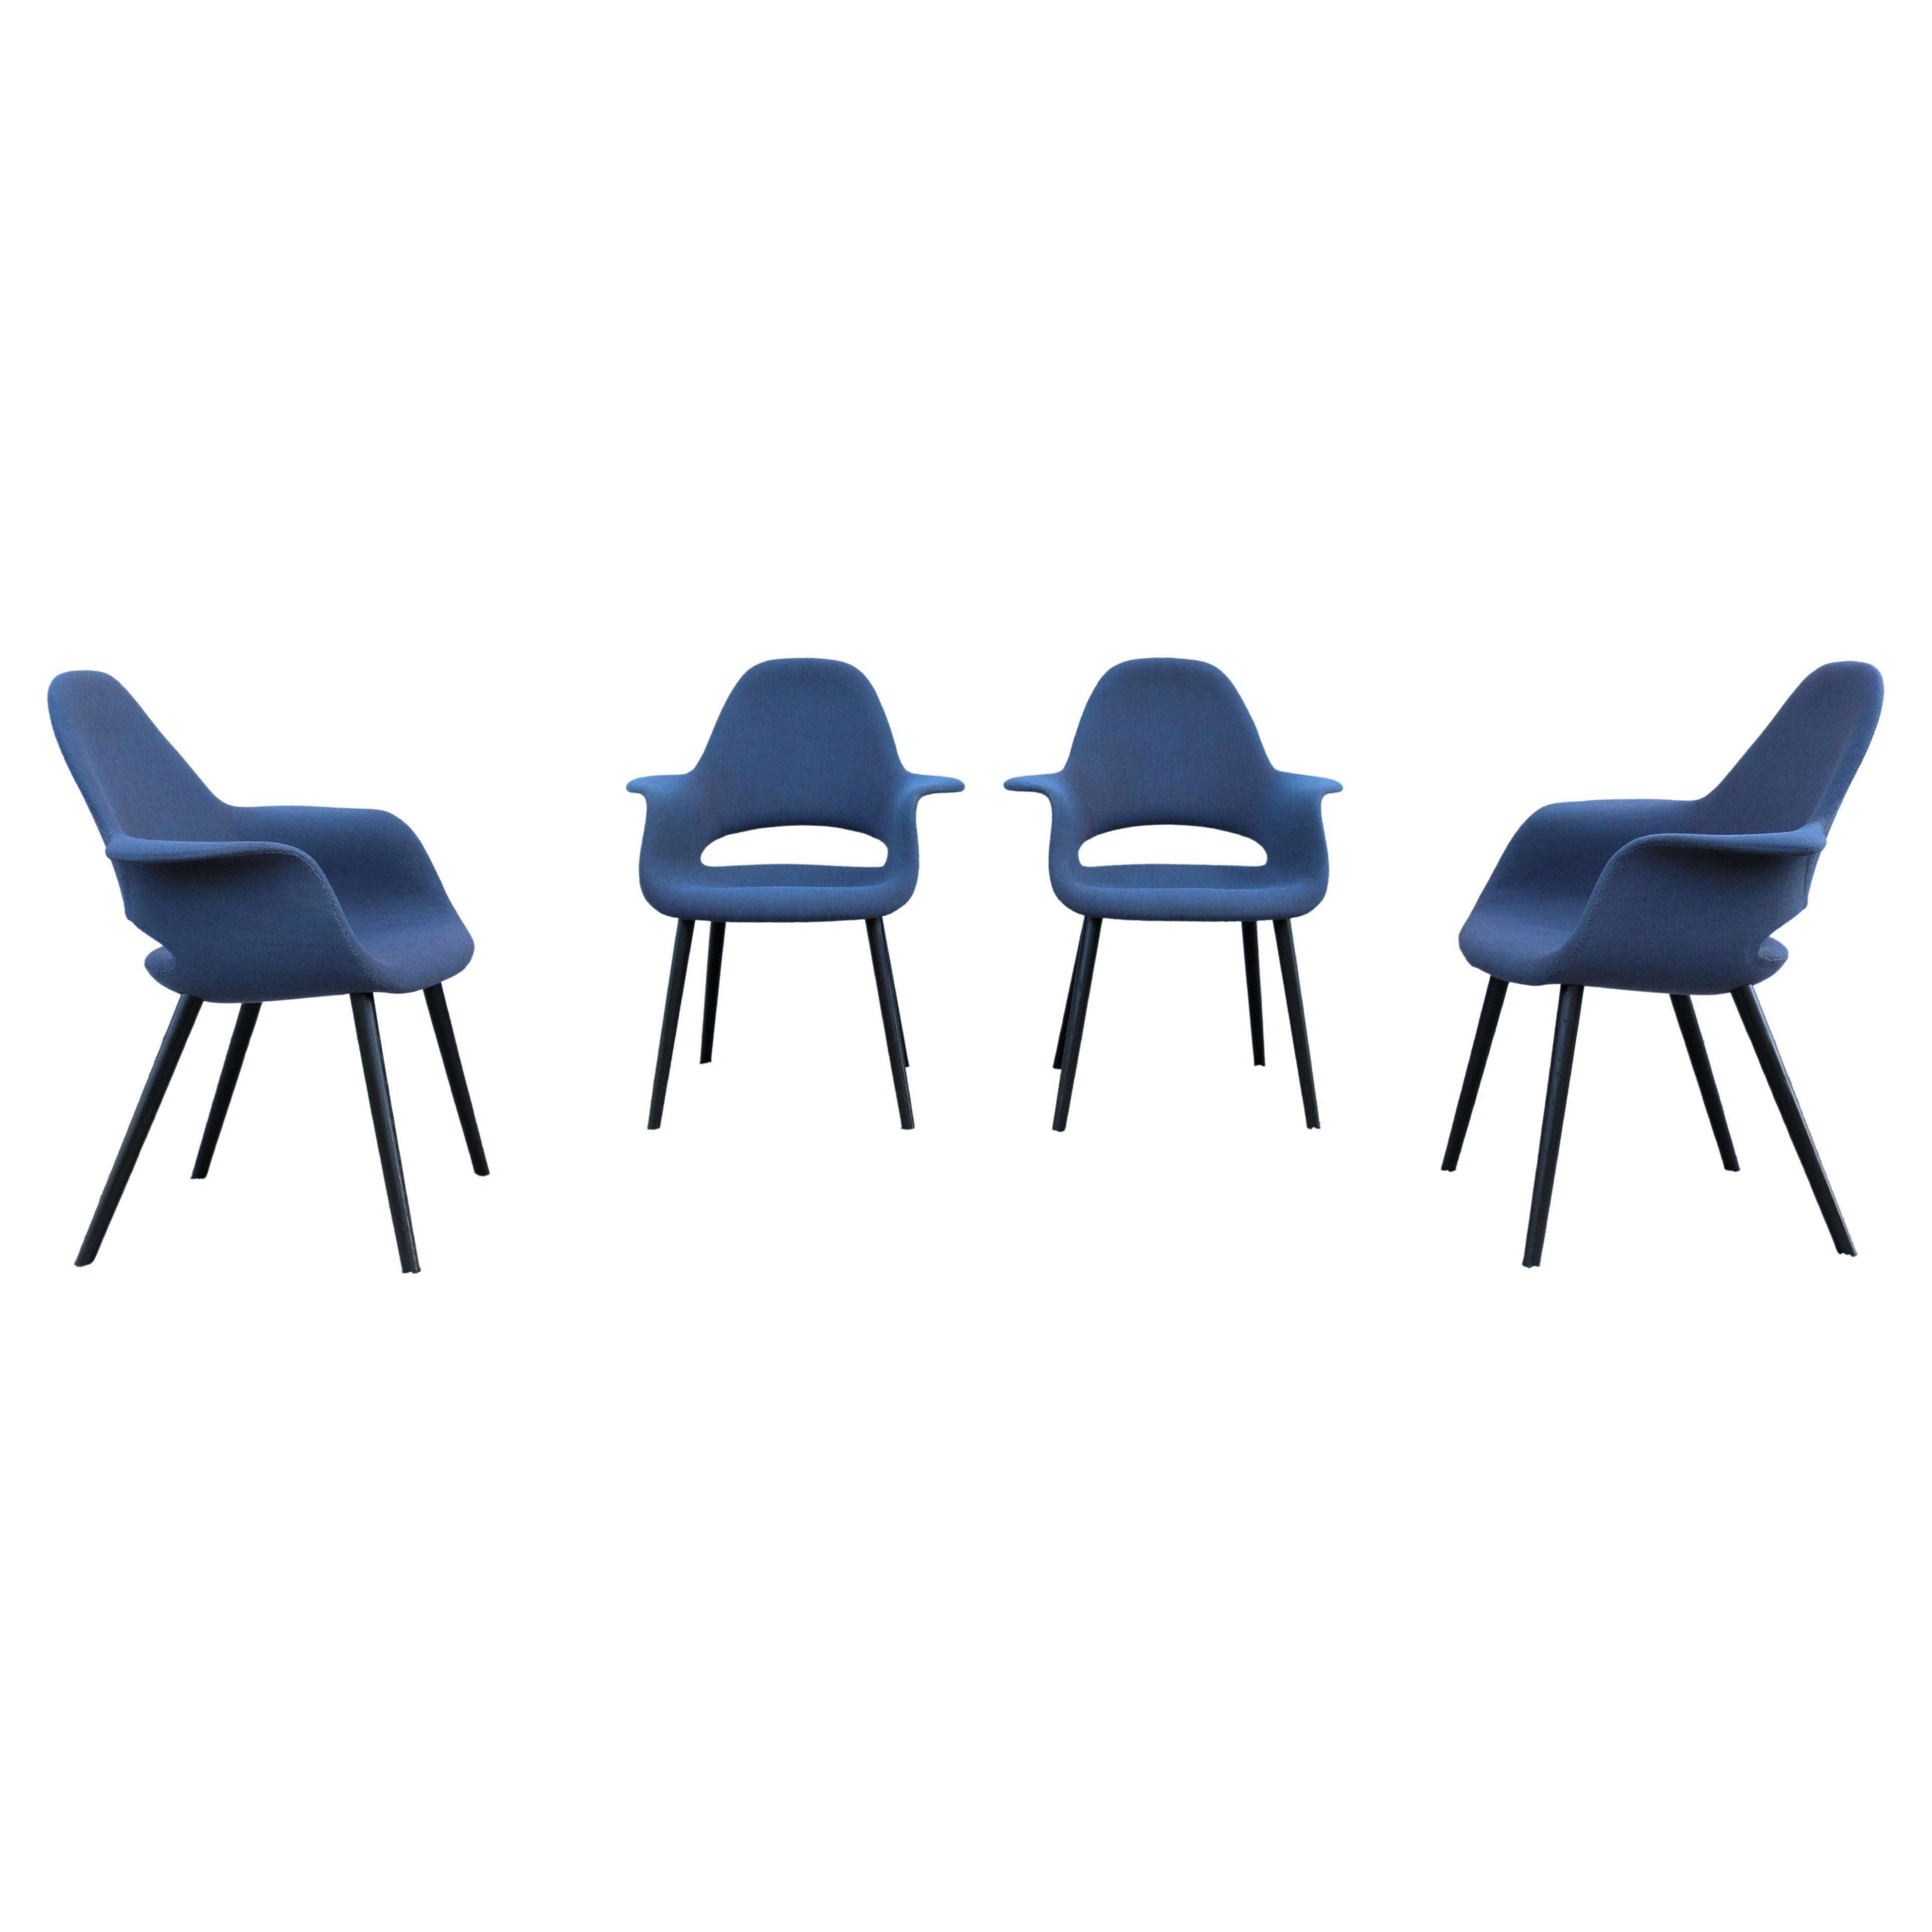 1940 Charles Eames and Eero Saarinen for Vitra Organic Conference Chairs,  Set of 4 For Sale at 1stDibs